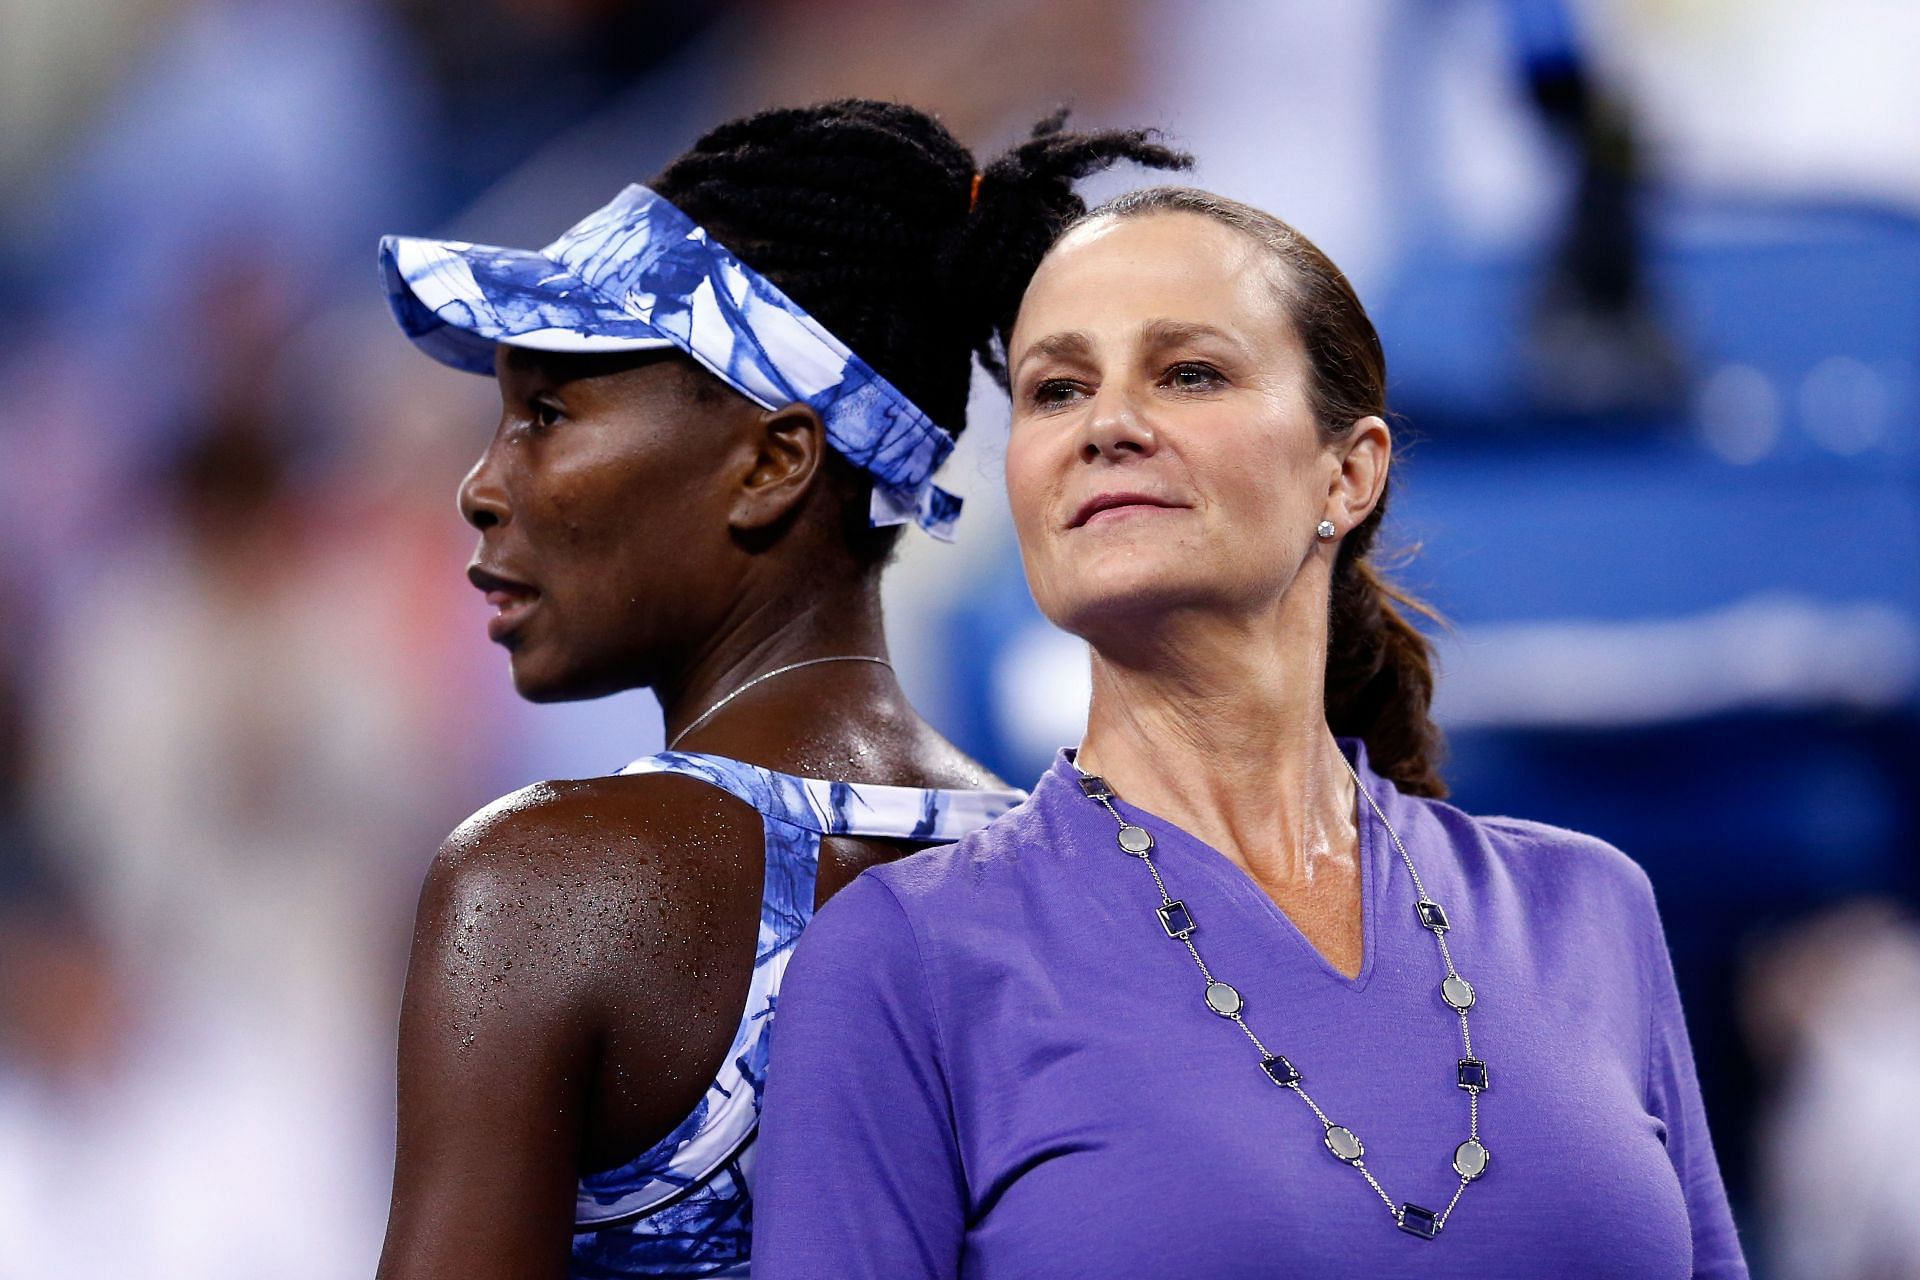 Pam Shriver at the 2014 US Open (with Venus Williams)